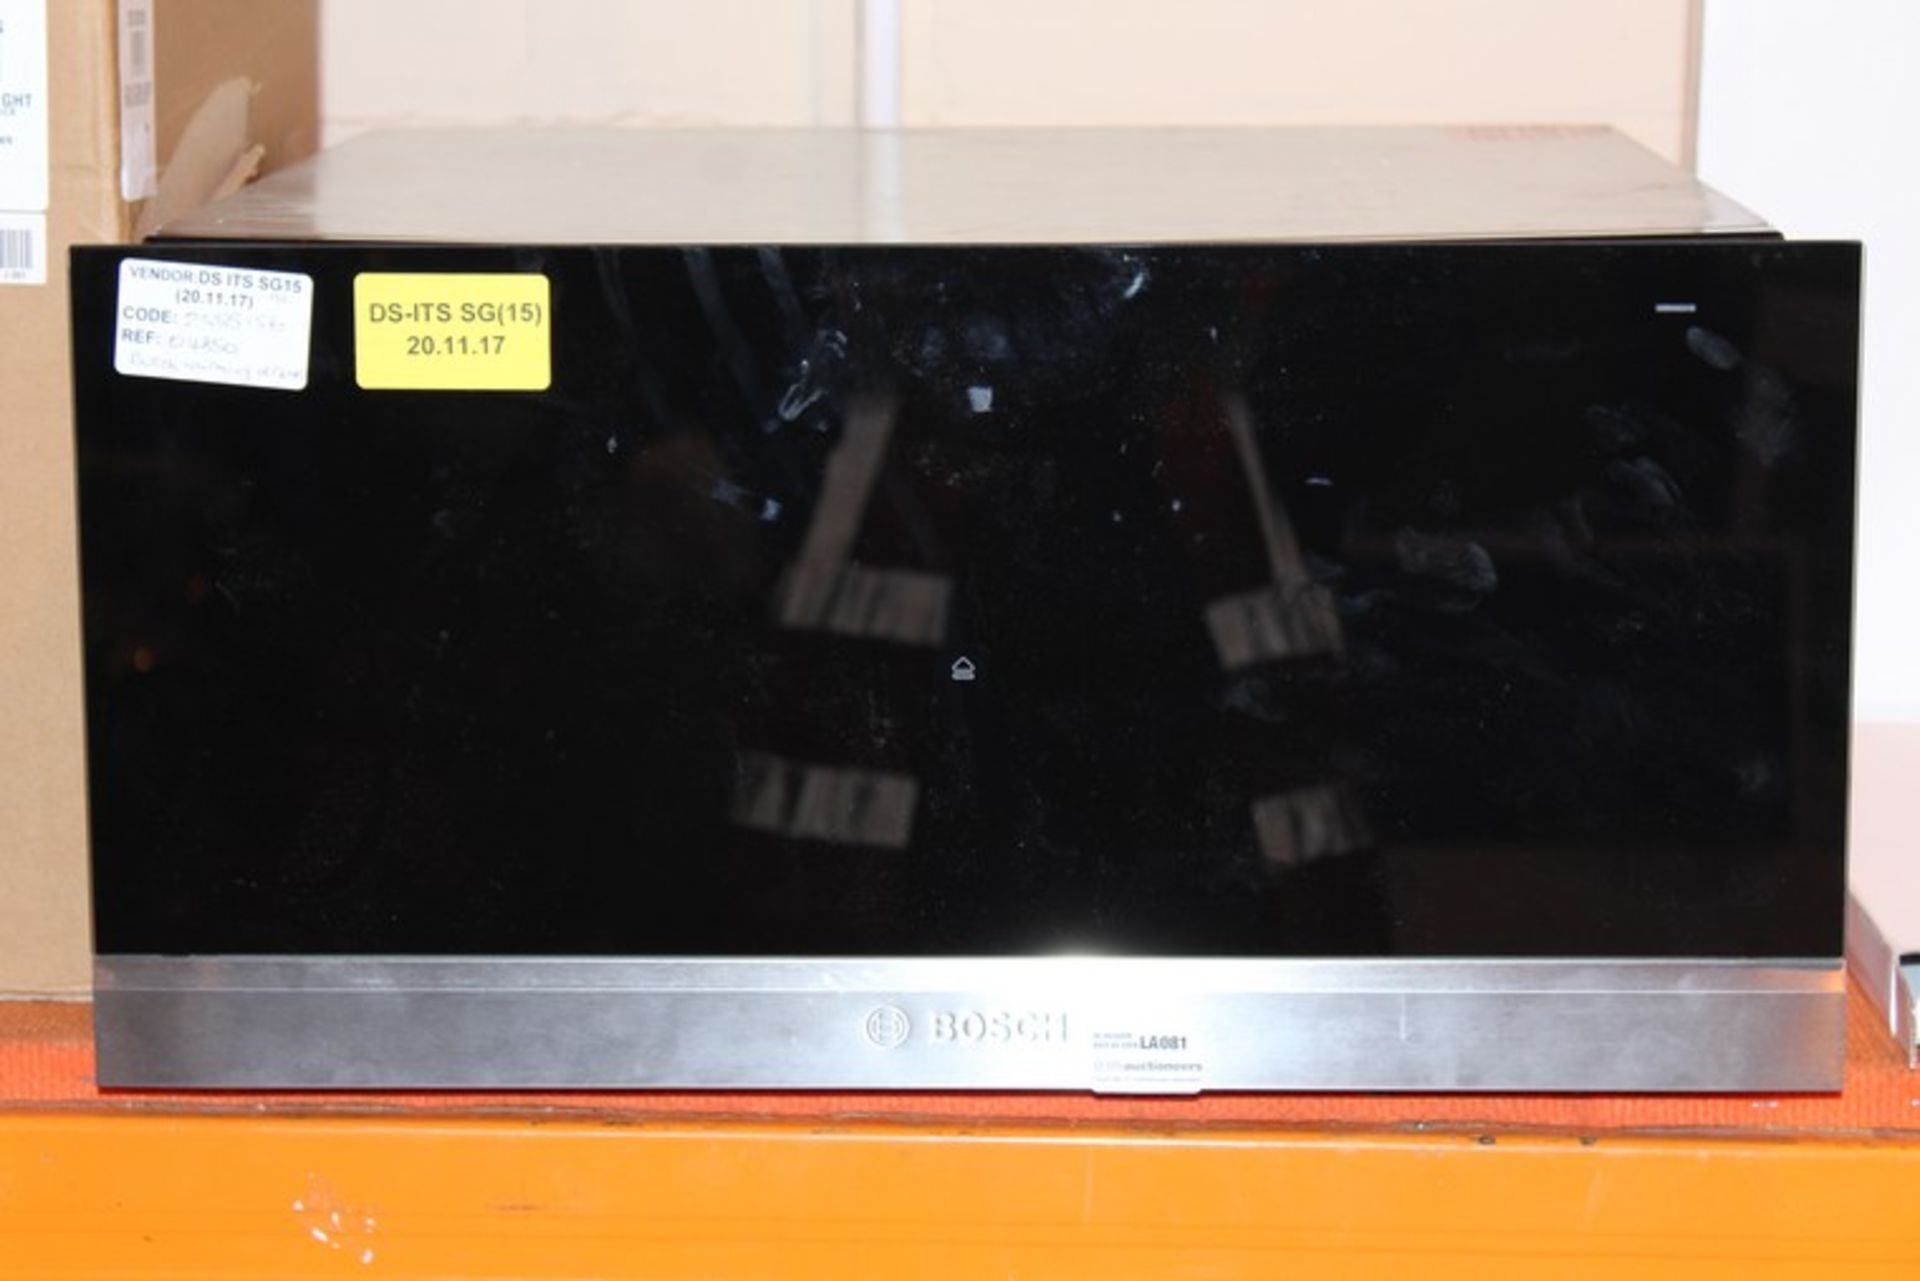 1 x BOSCH WARMING DRAWER RRP £485 (20.11.17) (2555156) *PLEASE NOTE THAT THE BID PRICE IS MULTIPLIED